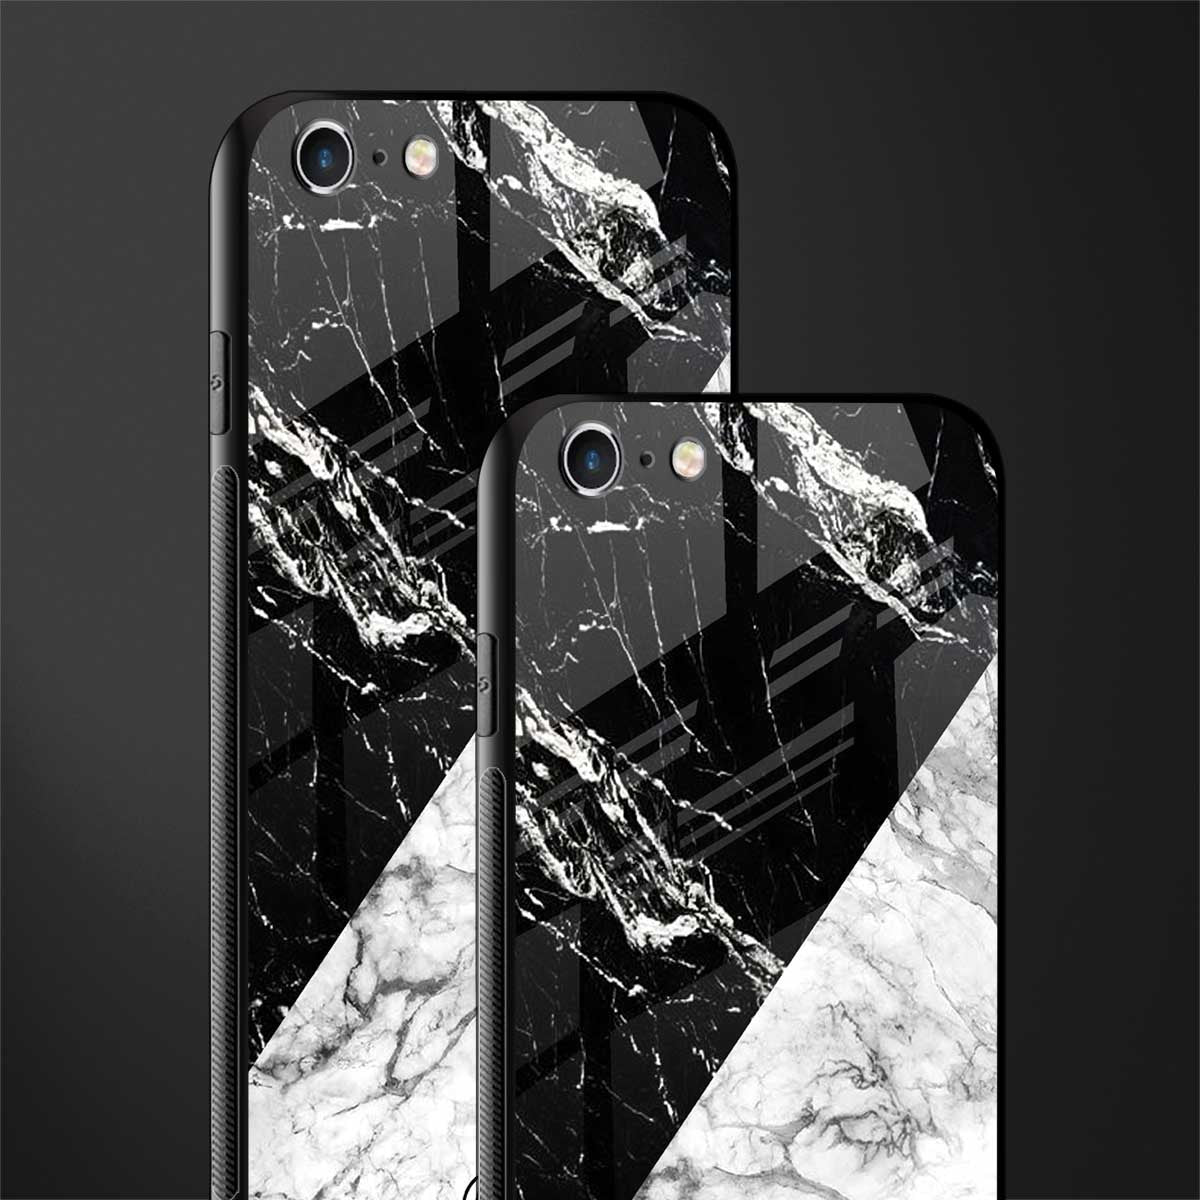 fatal contradiction phone cover for iphone 6